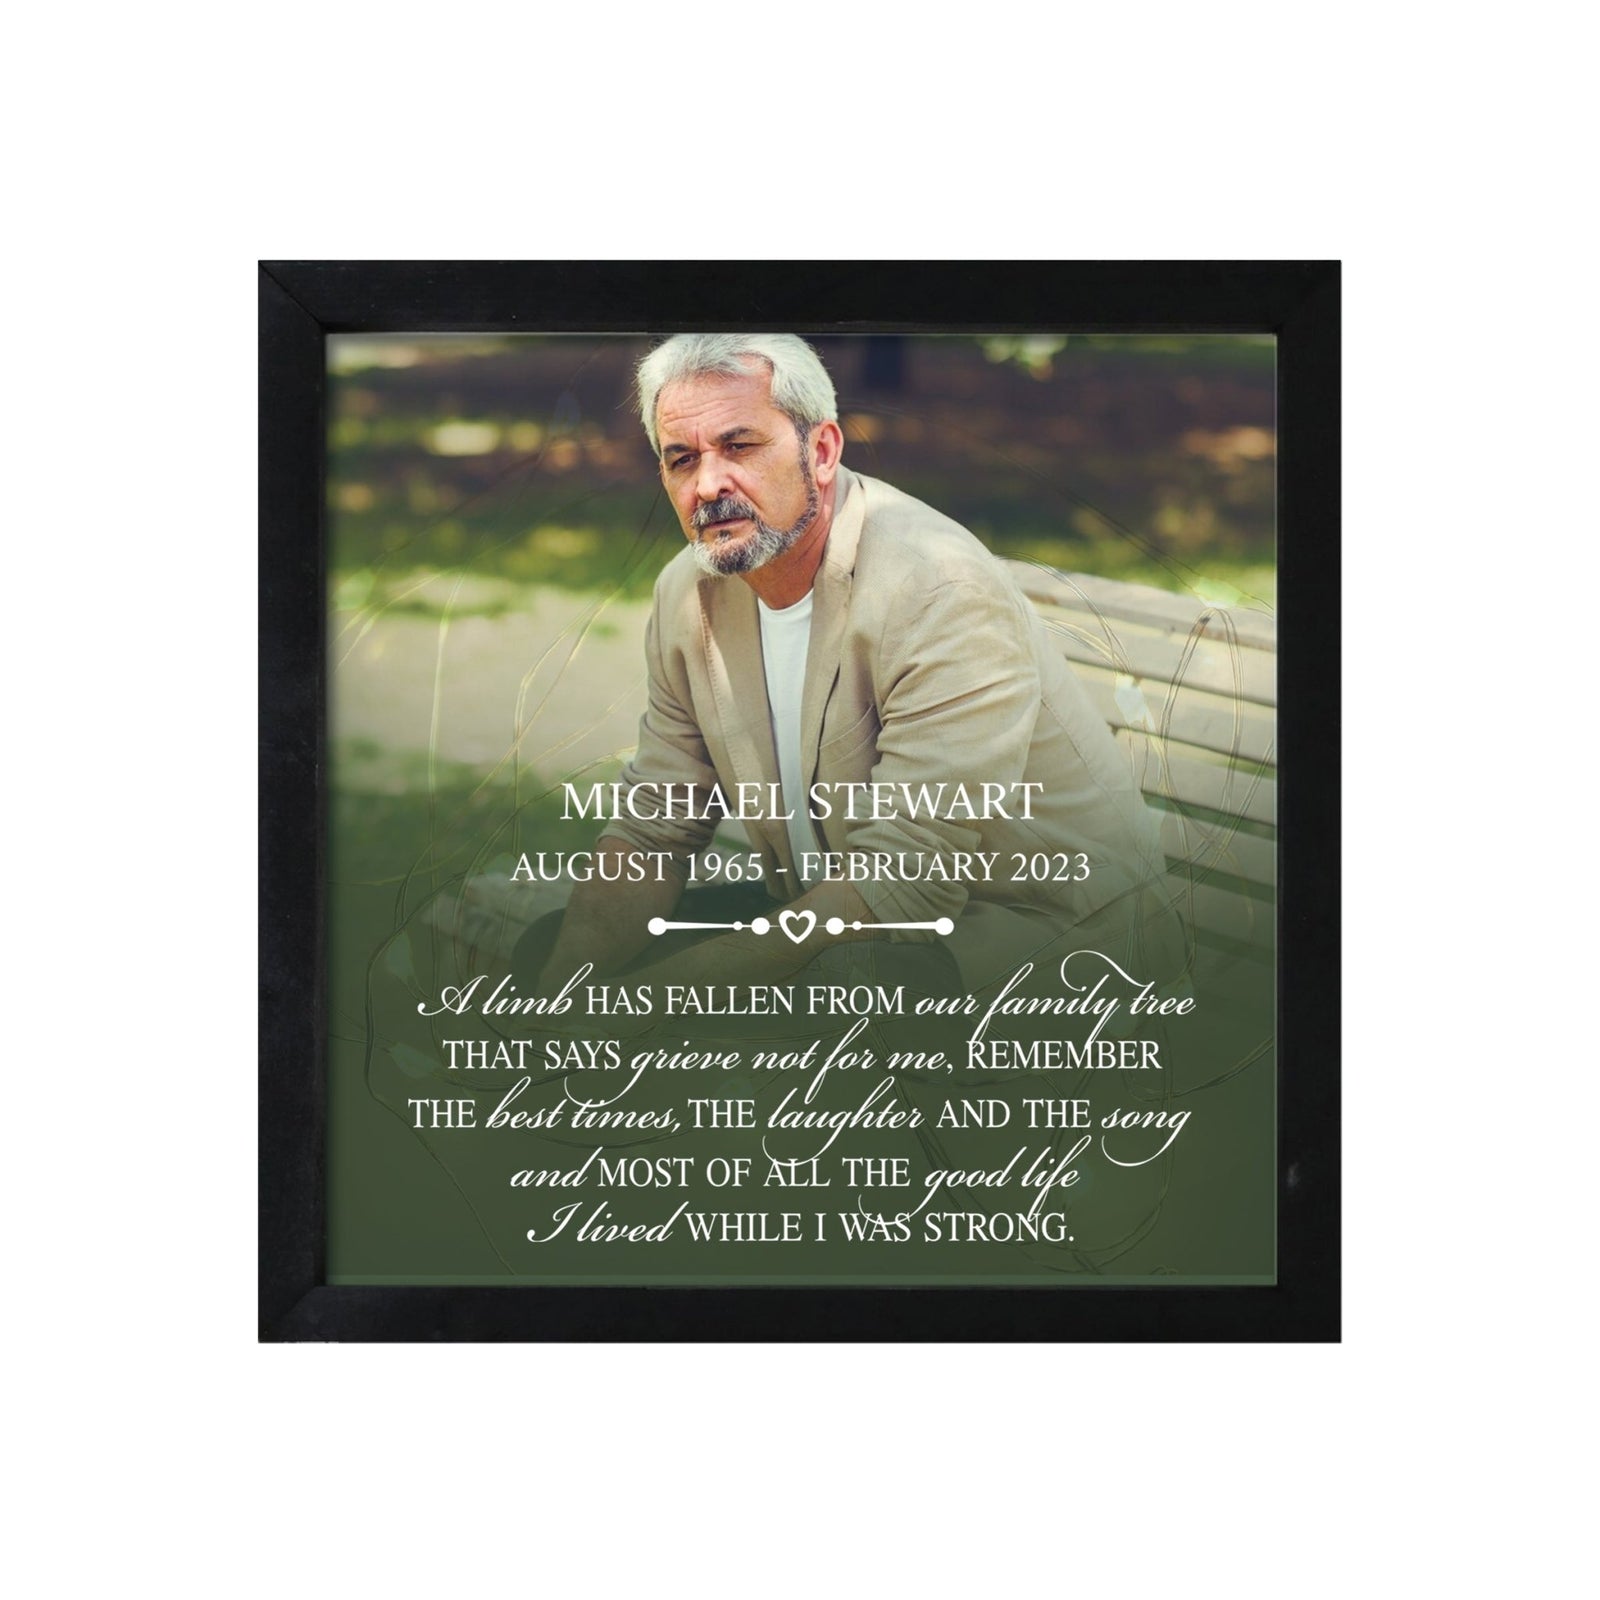 Personalized Memorial Black Framed Shadow Box With Lights Sympathy Gift & Wall Décor - A Limb Has Fallen - LifeSong Milestones